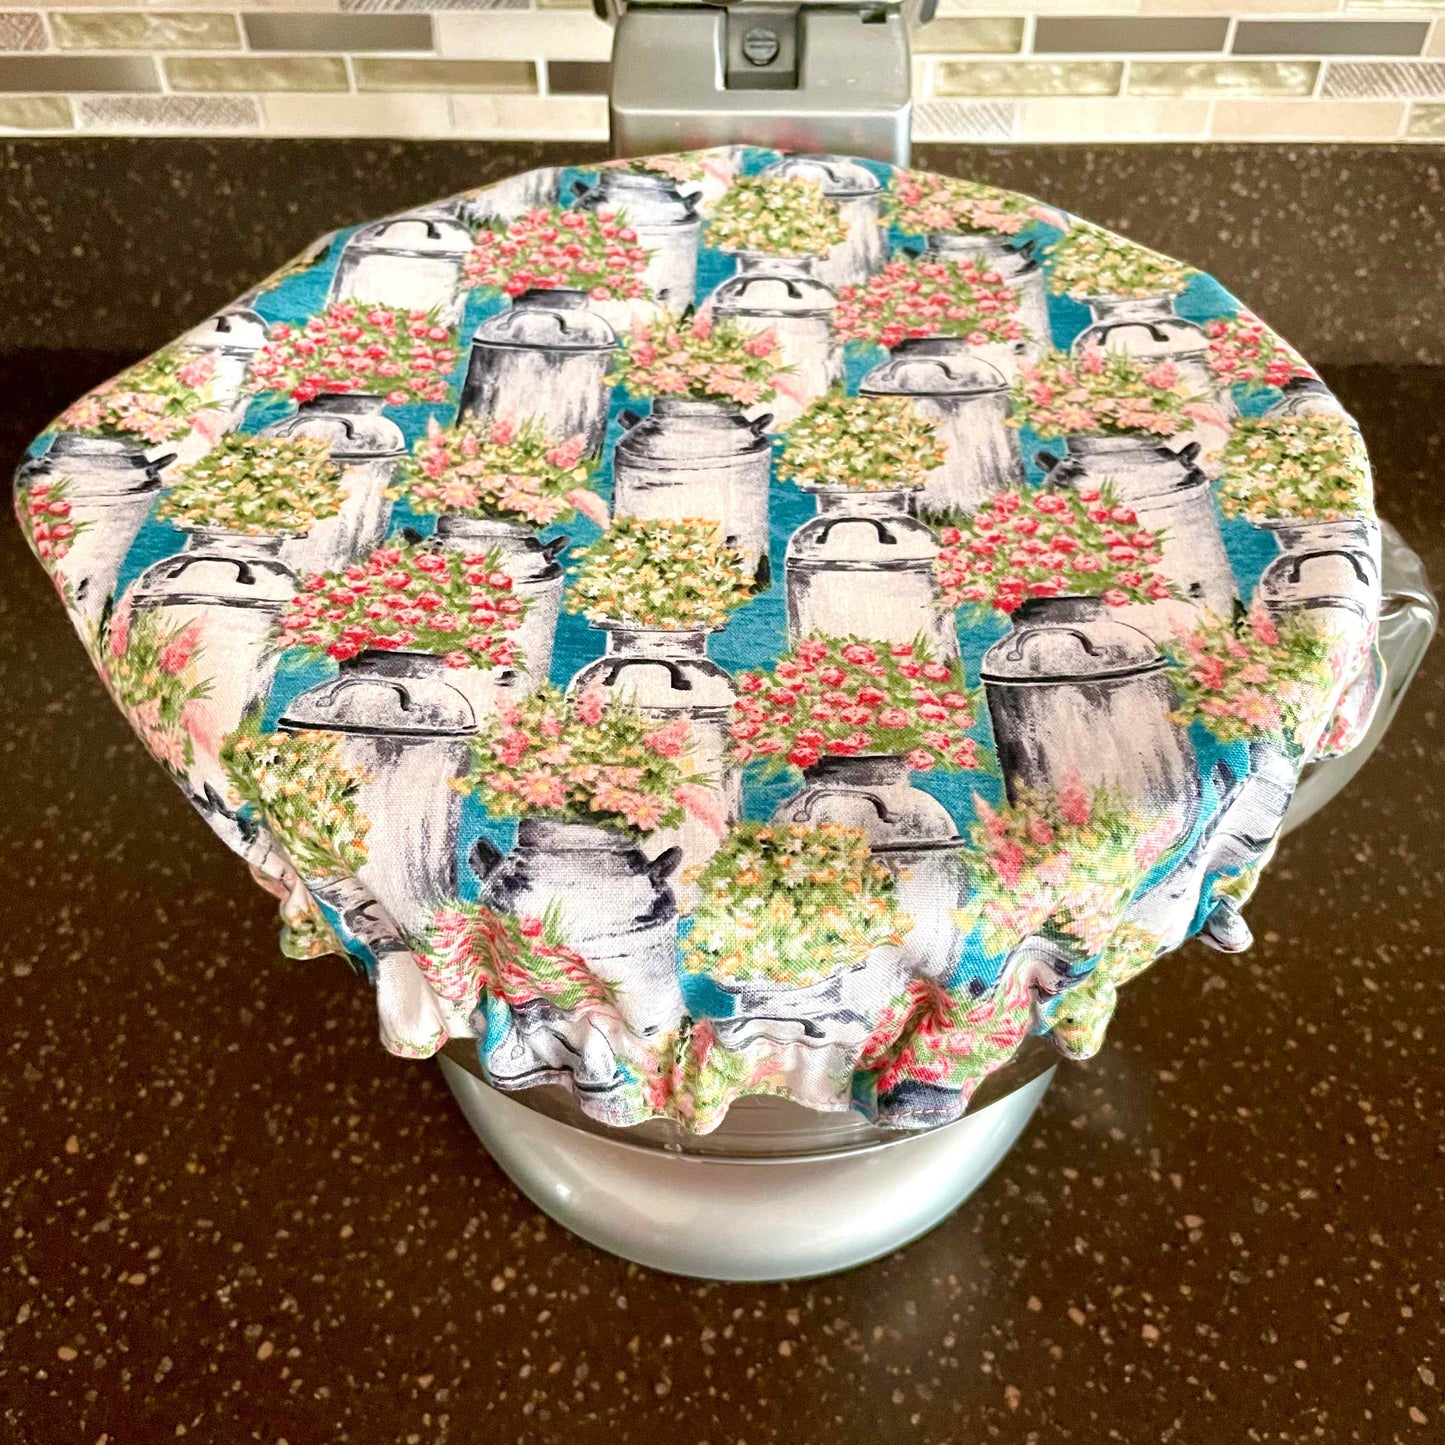 Stand Mixer Bowl Covers - Milk Cans With Flowers